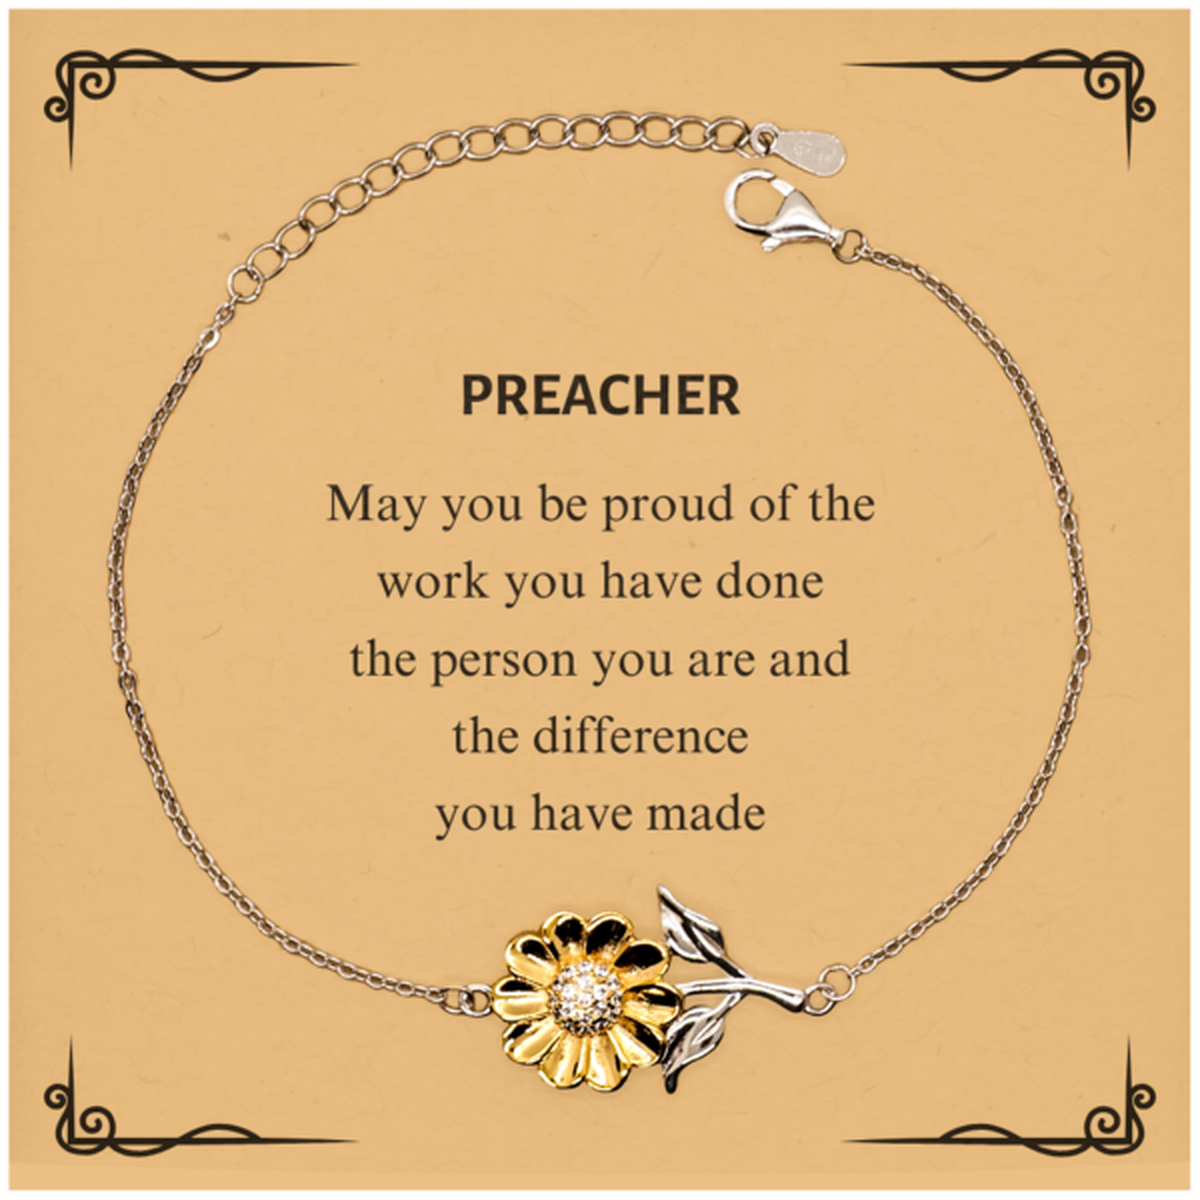 Preacher May you be proud of the work you have done, Retirement Preacher Sunflower Bracelet for Colleague Appreciation Gifts Amazing for Preacher